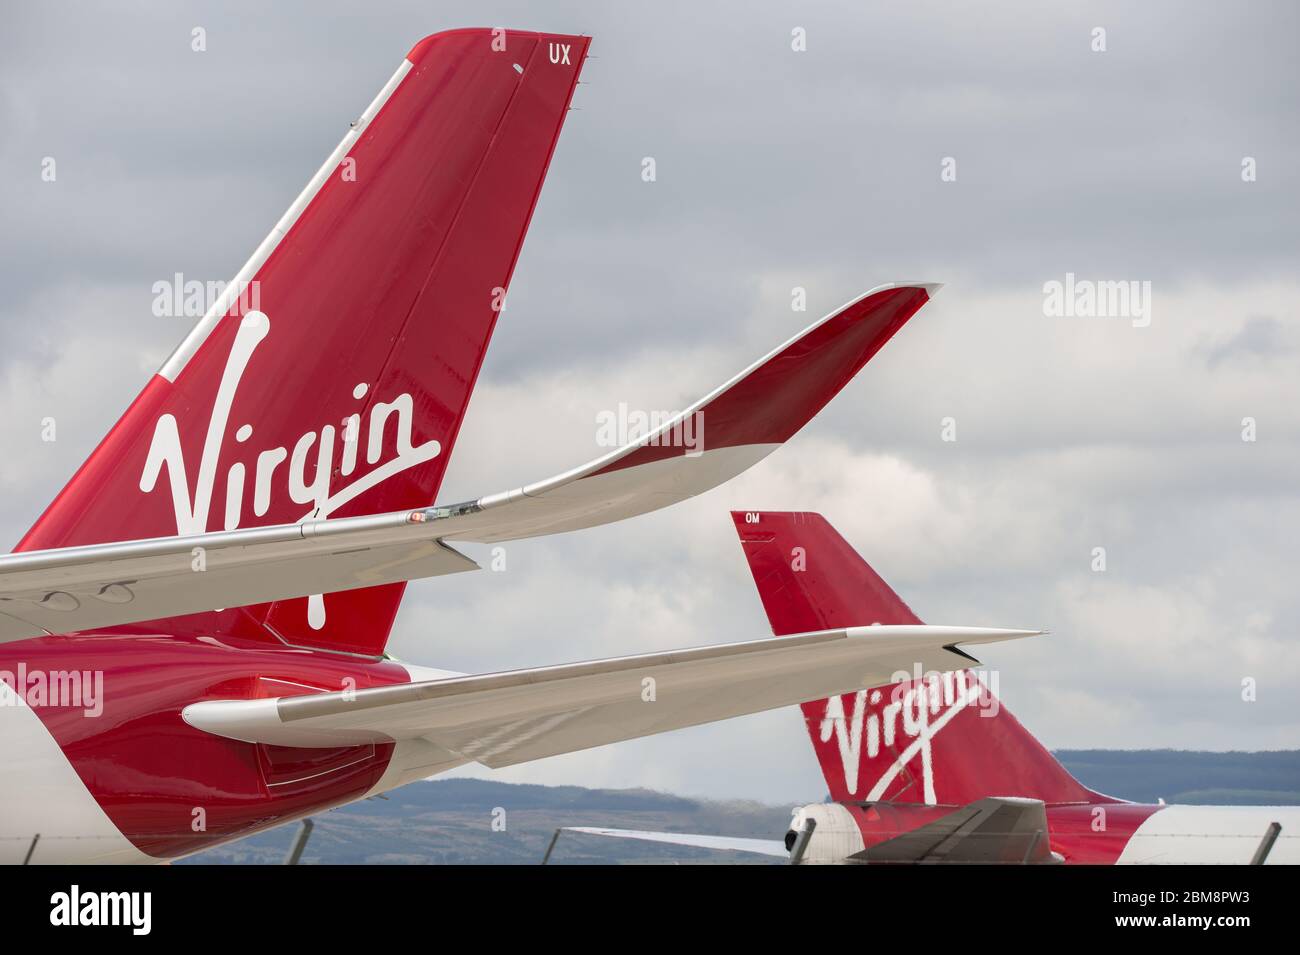 Glasgow, UK. 25 August 2019.  Pictured: (foreground) Virgin Atlantic's brand new flagship long haul aircraft, Airbus A350-1000 (reg G-VLUX) nicknamed Red Velvet which has the altar curved slender looking wingtips; (background), Virgin Atlantic Boeing 747-400 reg G-VROM nicknamed Barbarella is one of the long haul wide die body aircraft in Virgin's leisure fleet. Normally covering London Gatwick, this aircraft serves Glasgow 3 times per week. Credit: Colin Fisher/Alamy Live News. Stock Photo